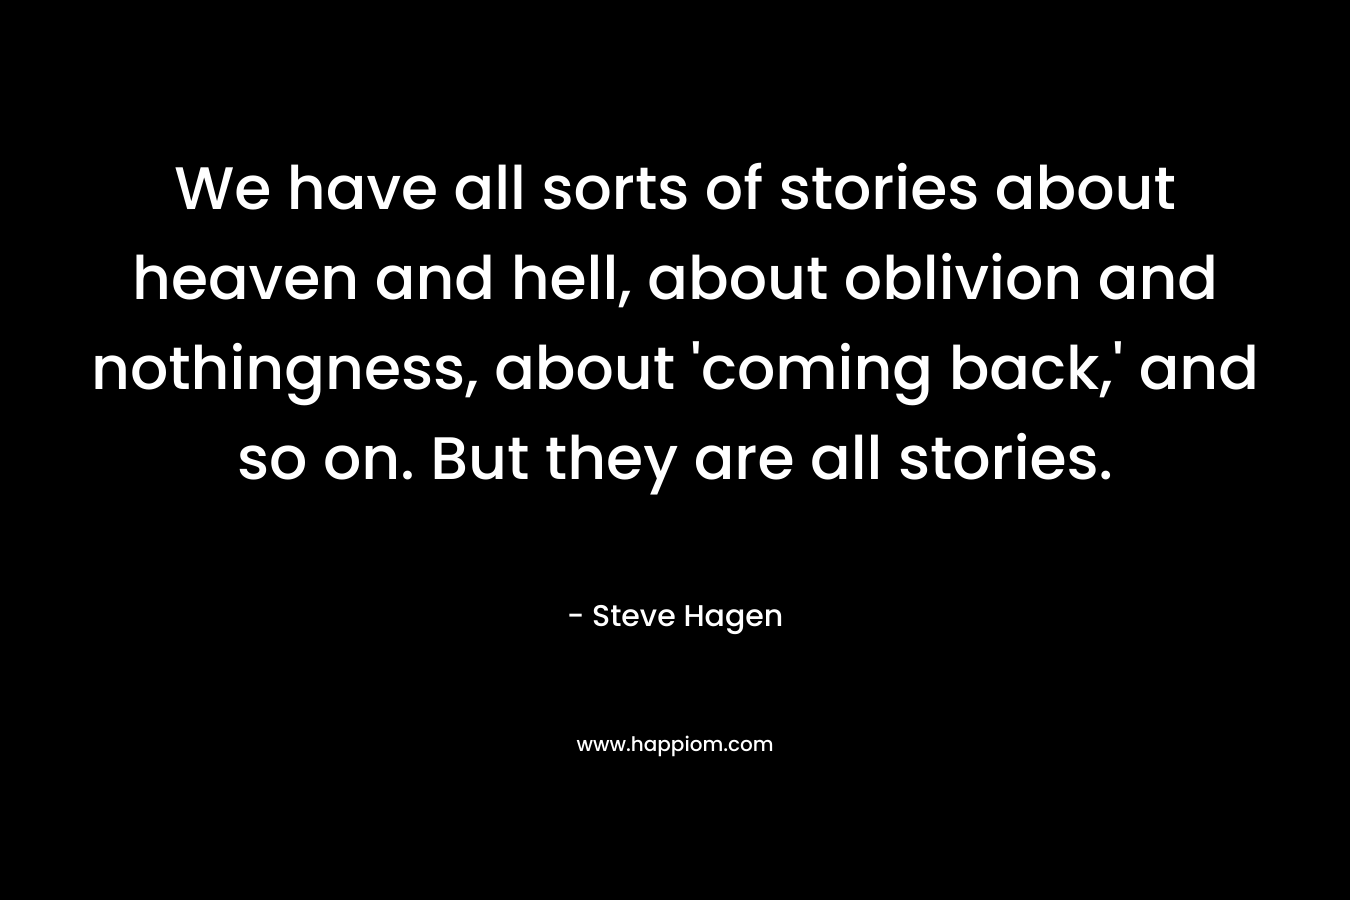 We have all sorts of stories about heaven and hell, about oblivion and nothingness, about ‘coming back,’ and so on. But they are all stories. – Steve Hagen